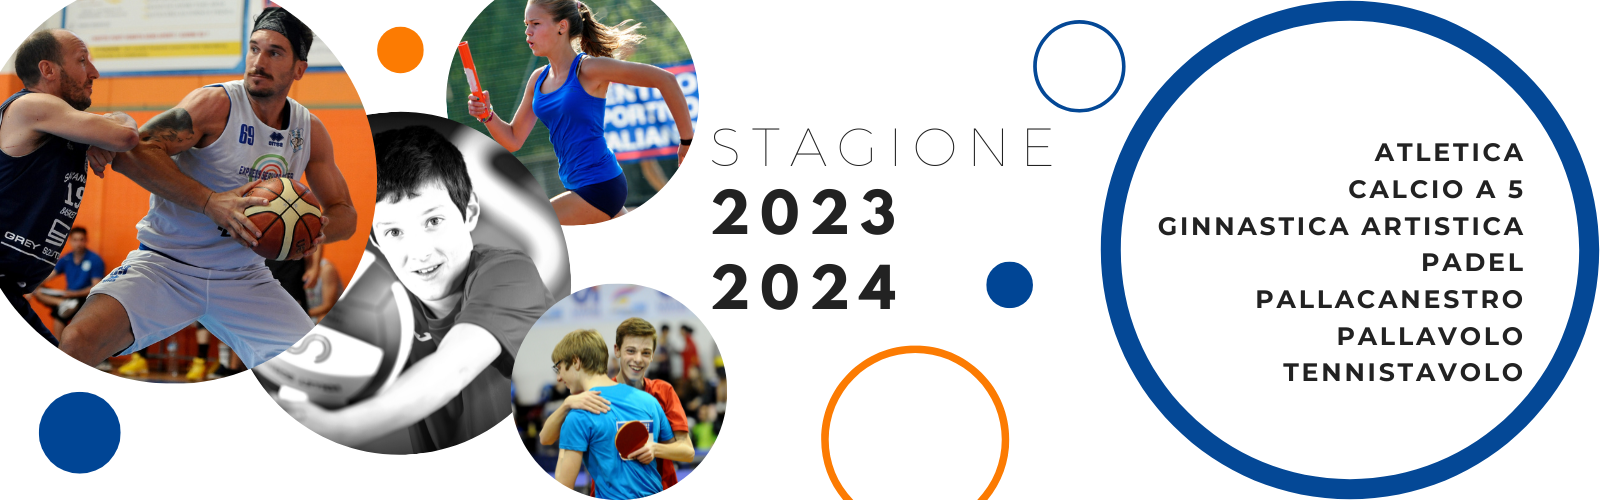 Stagione 2023-2024